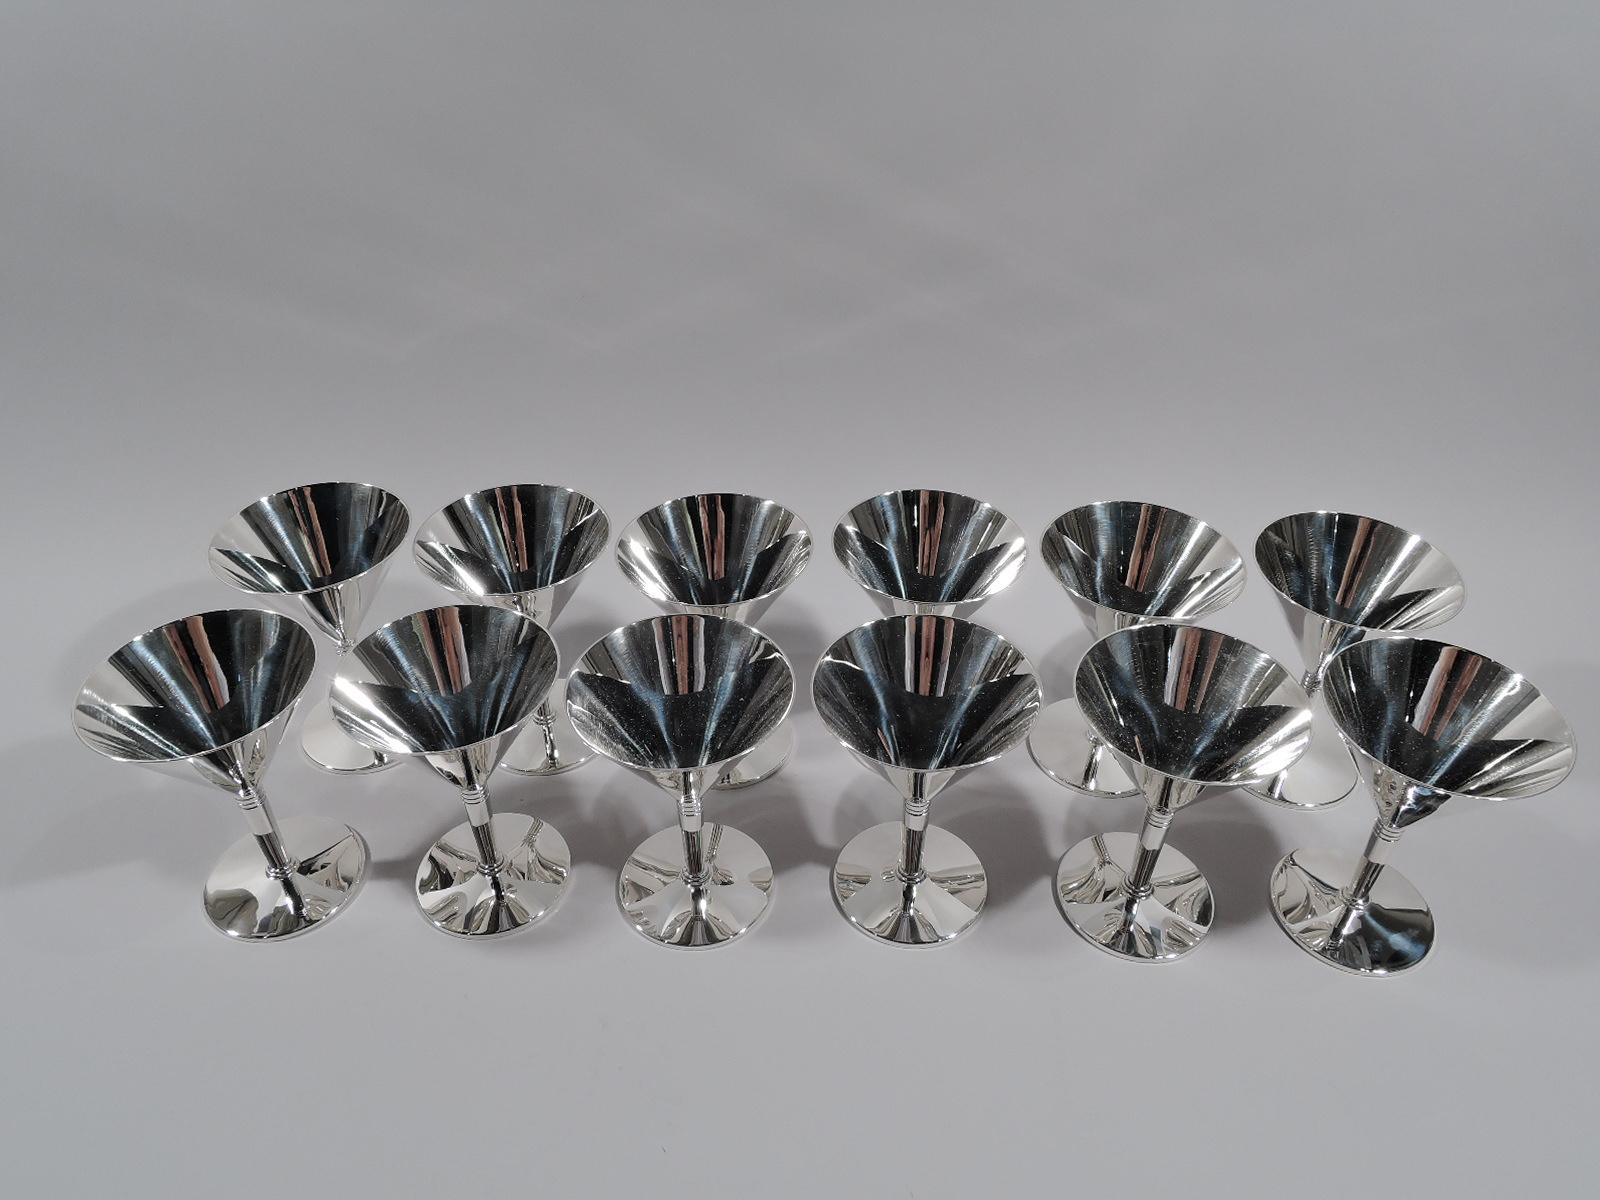 Set of 12 Art Deco sterling silver cocktail cups. Made by Tiffany & Co. in New York, ca 1935. Each: Conical bowl on cylindrical stem terminating in stepped base mounted to flat round foot. Tooled bands on stem. Spare and functional geometry. Fully